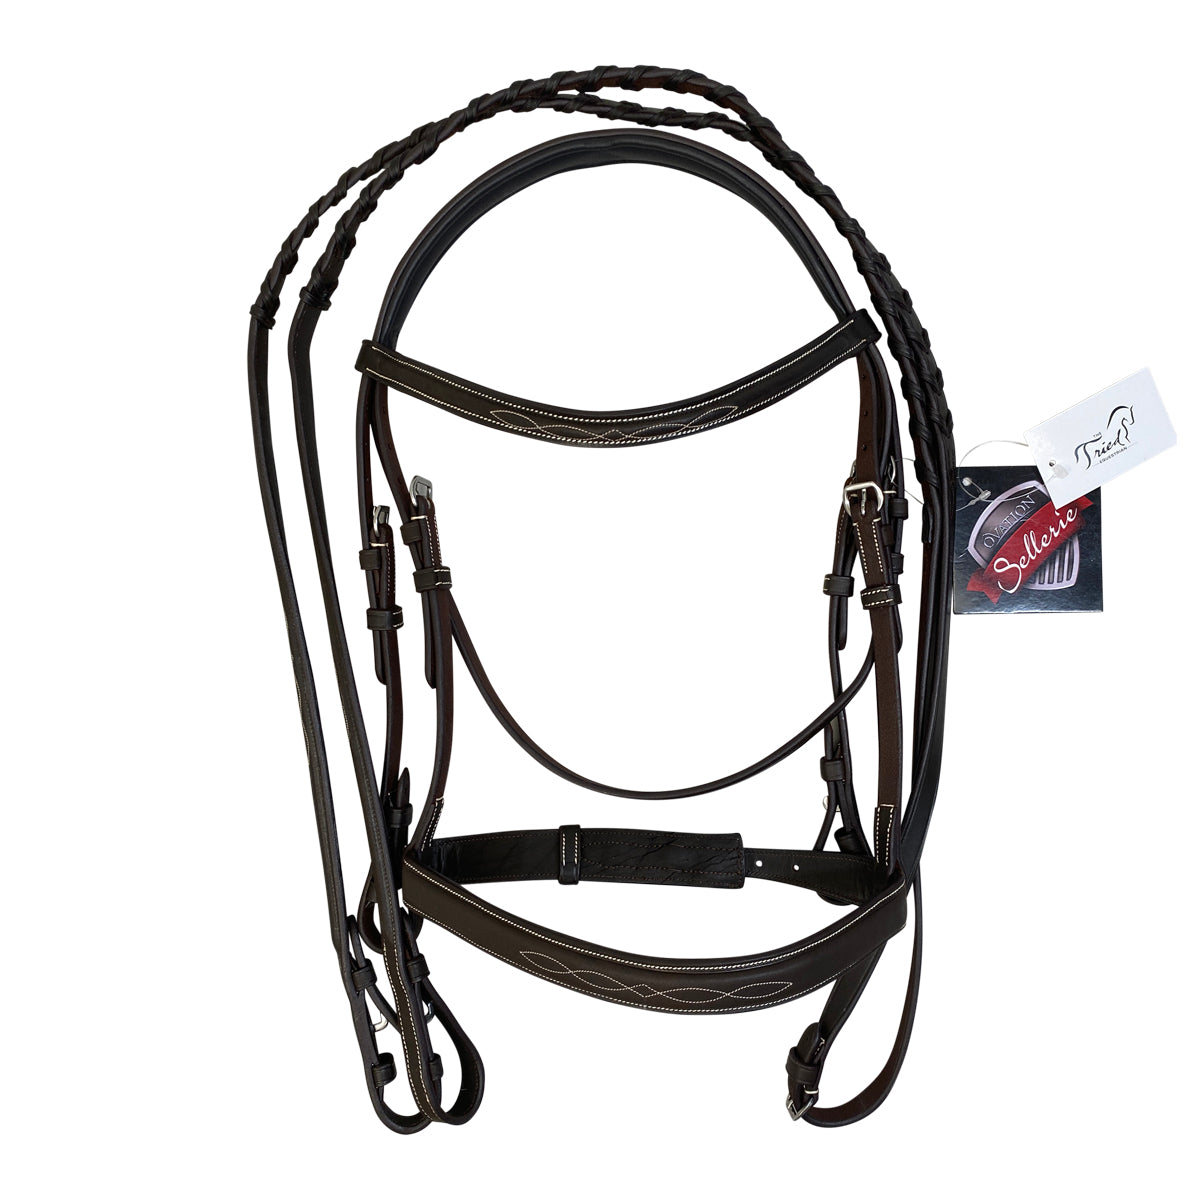 Ovation Classic &#39;Fancy Stitched Wide Nose Comfort Crown&#39; Bridle in Brown - Horse